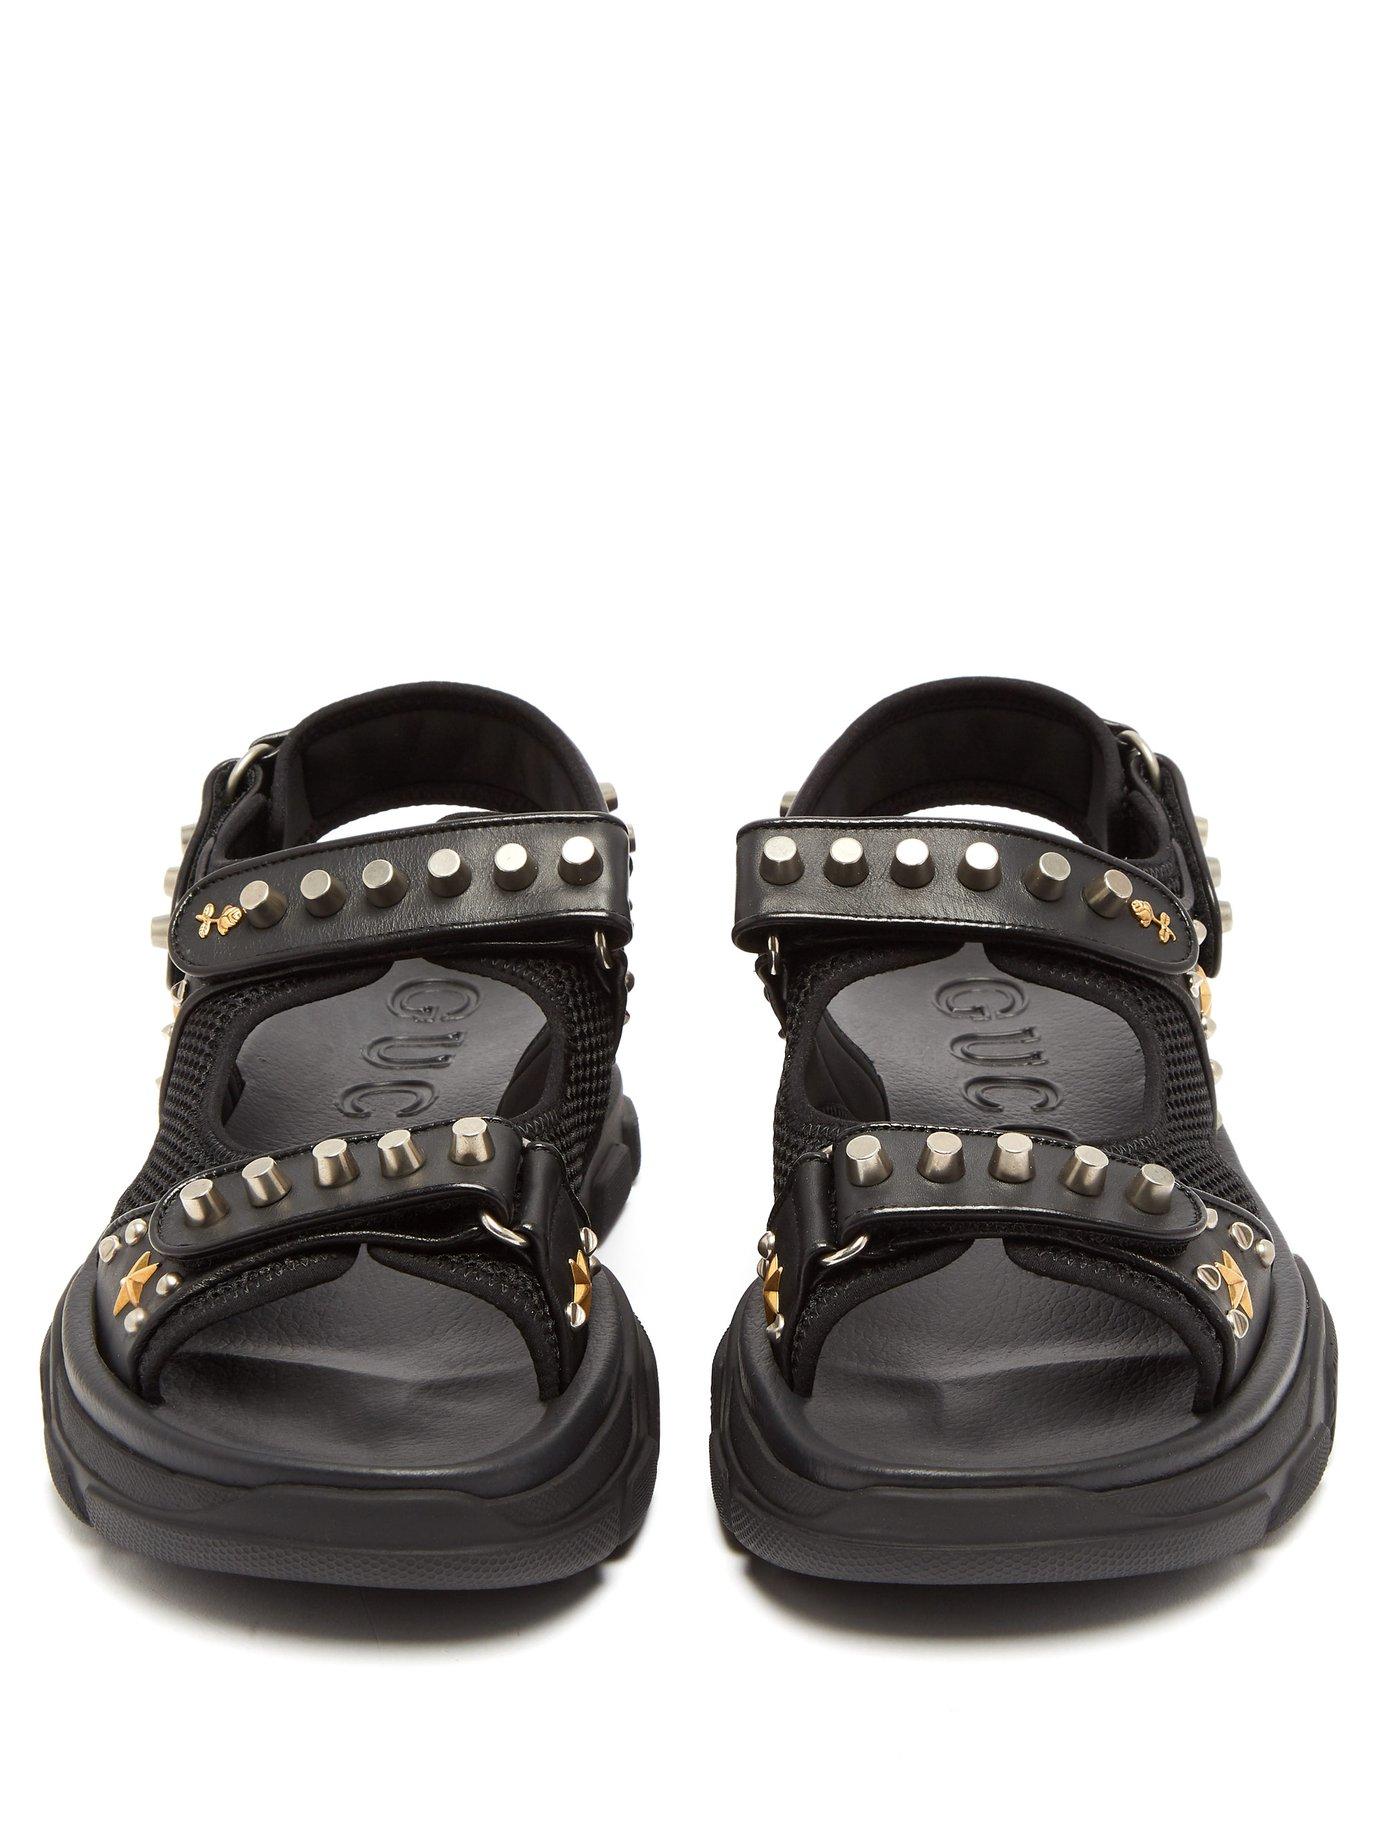 gucci studded sandals